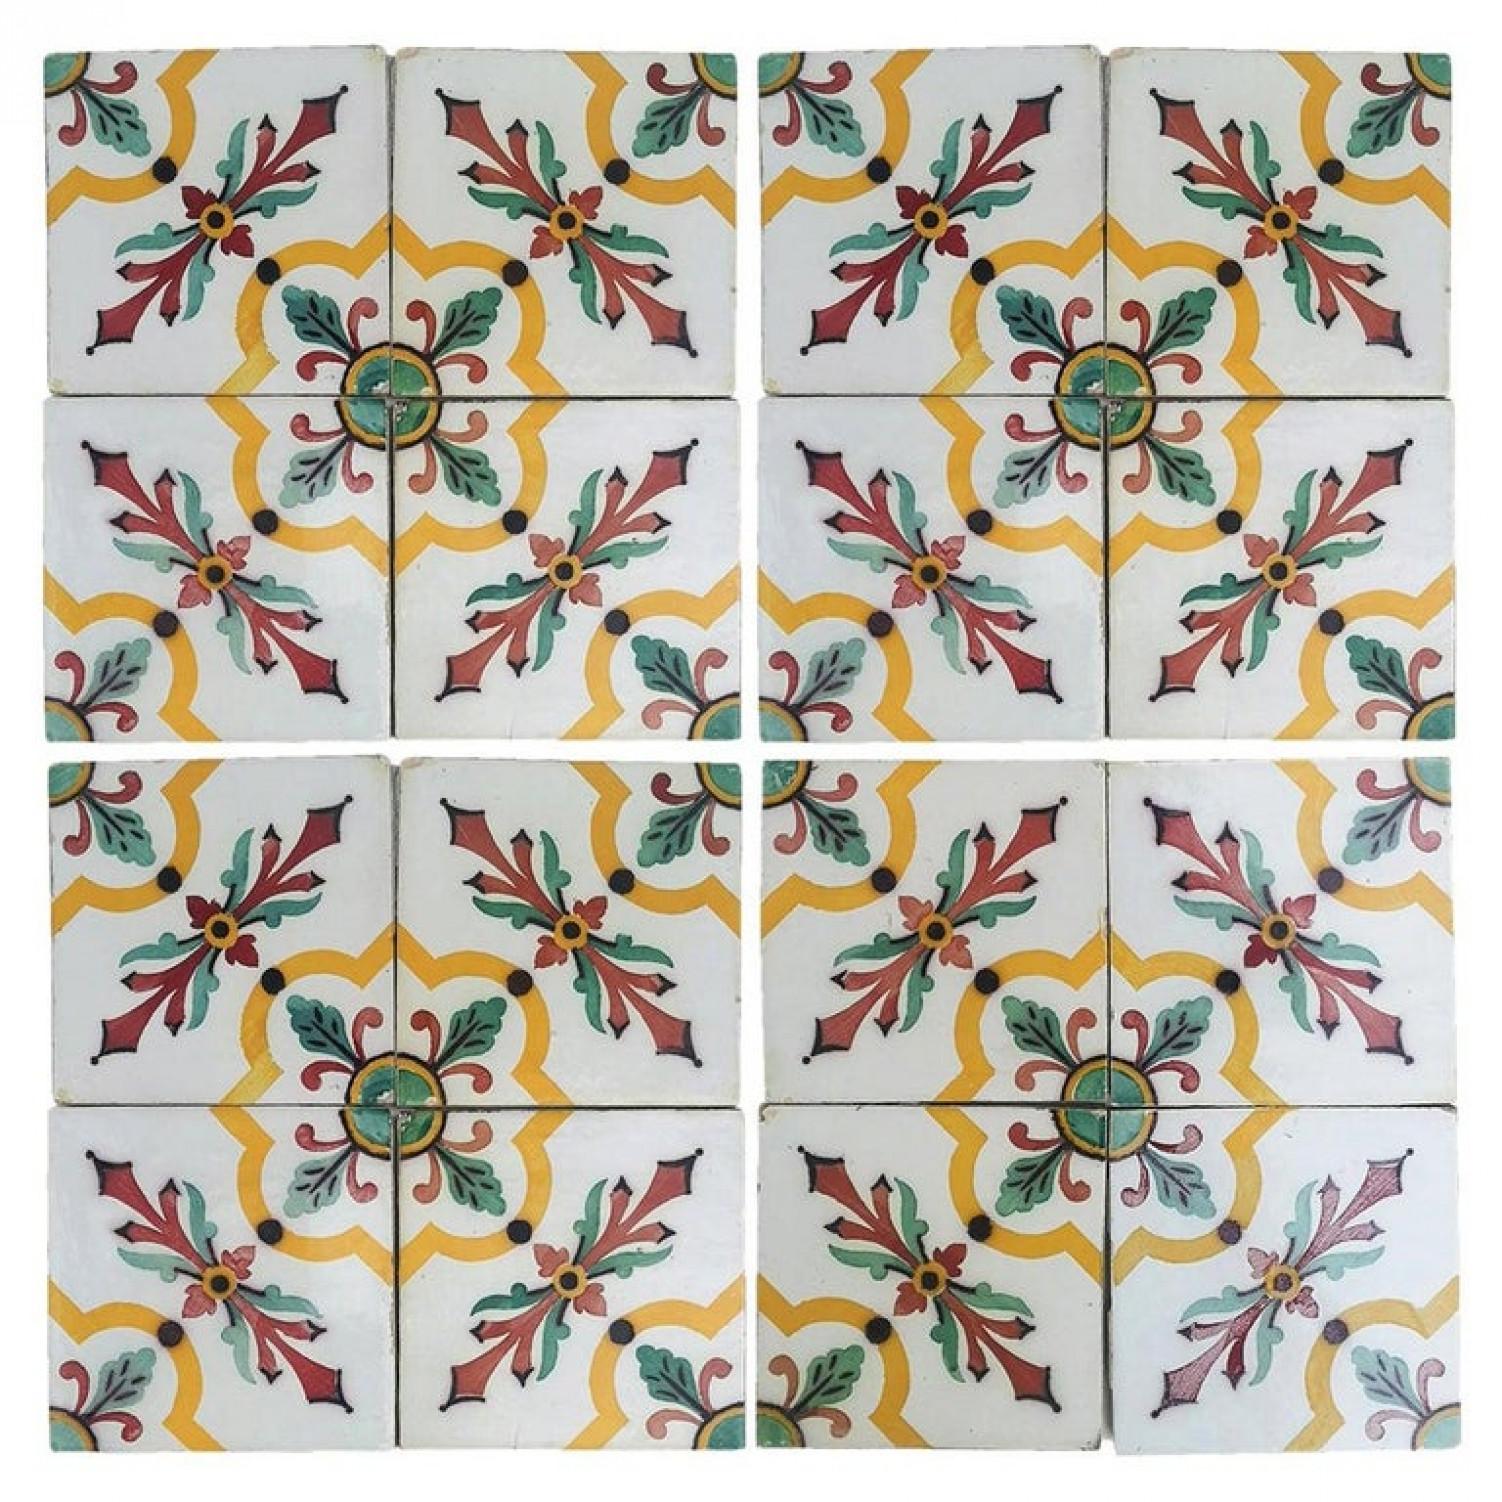 This is a large set of 350 antique French handmade ceramic tiles. Manufactured by Devres, circa 1920s. Colorful pattern in yellow, red and green. These tiles would be charming displayed on easels, framed or incorporated into a custom tile